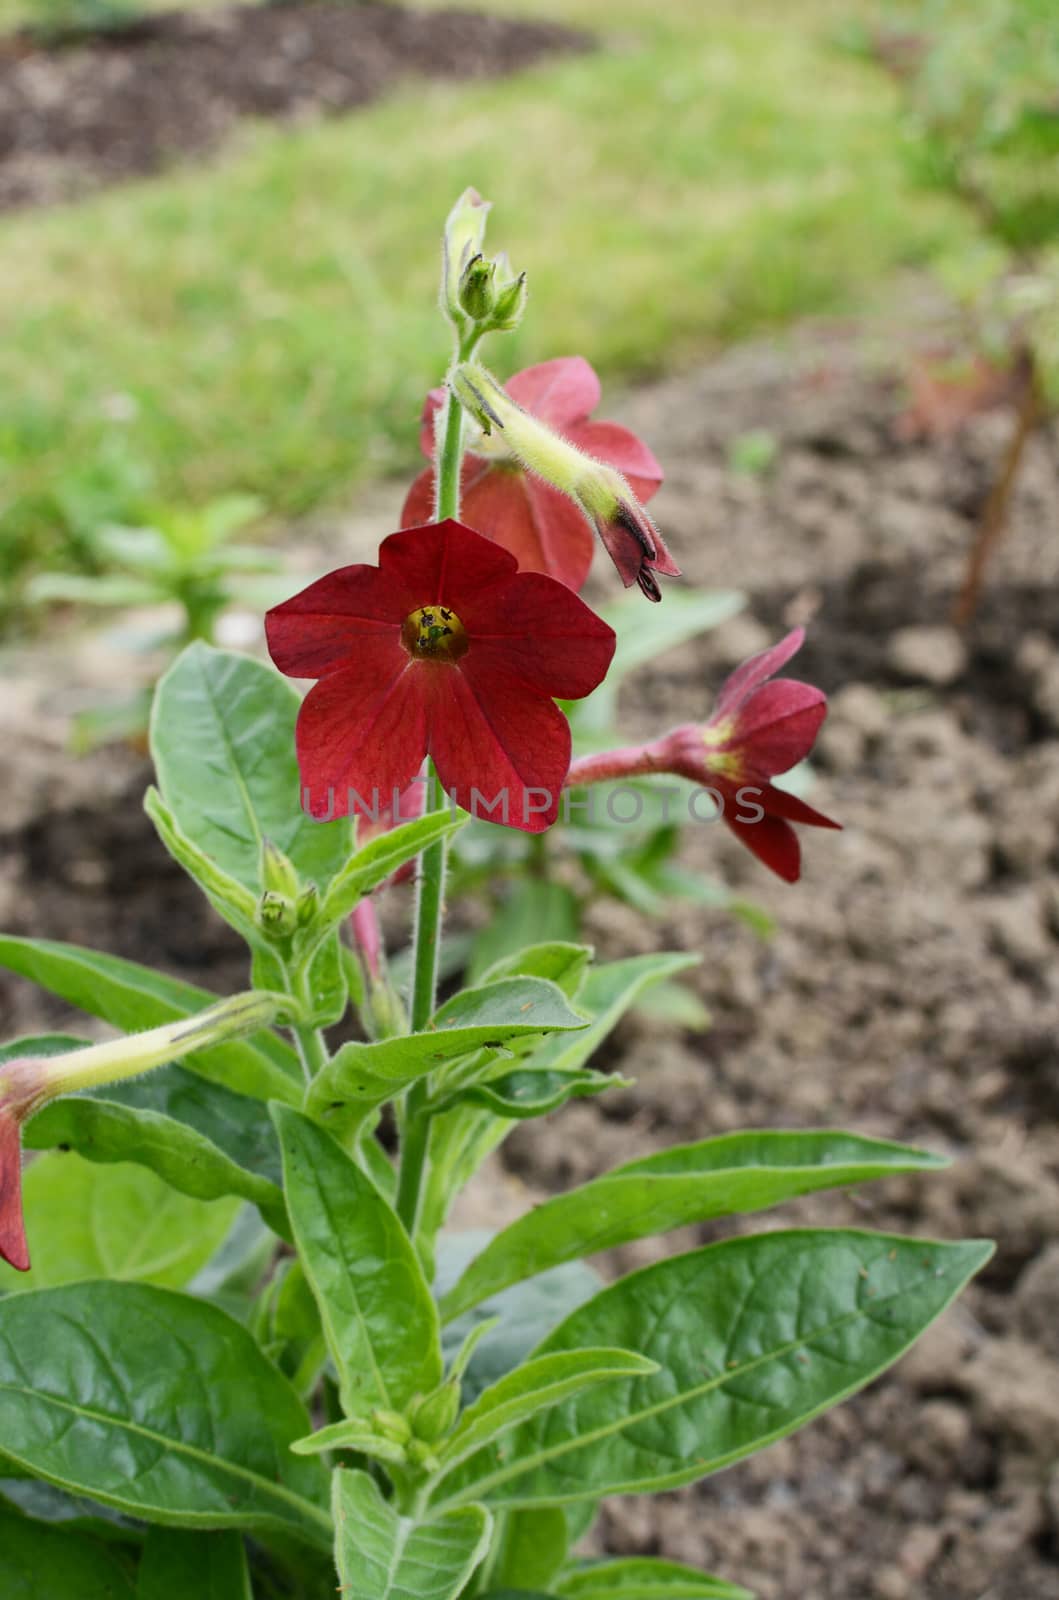 Red nicotiana flowers, Baby Bella, starting to bloom in a flower bed - Nicotiana x hybrida